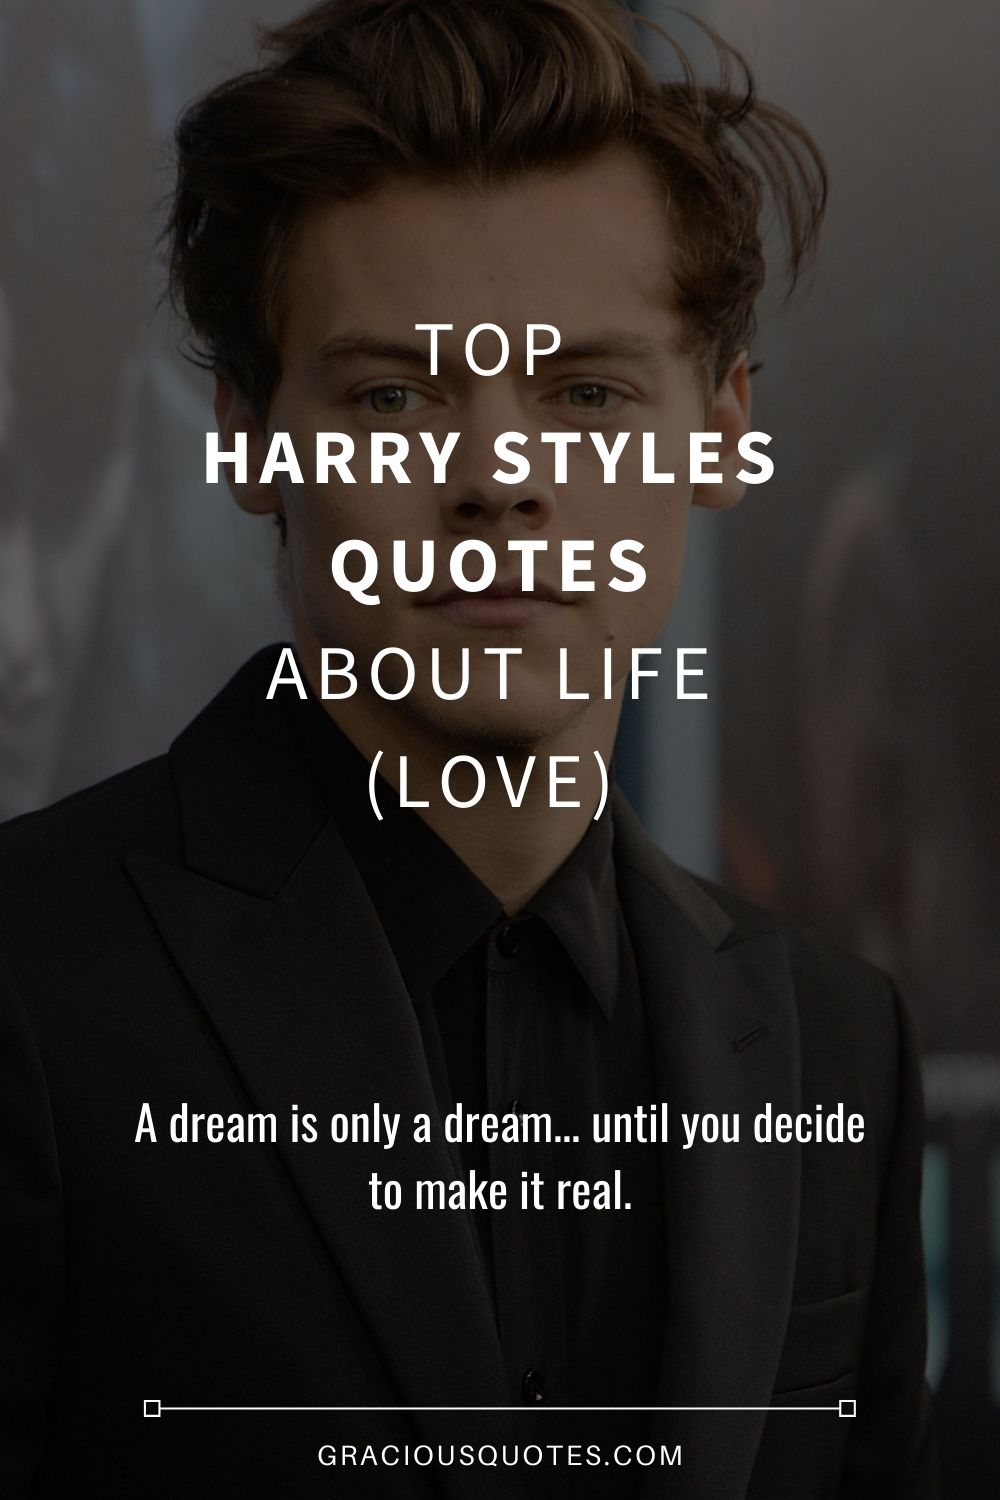 Top Harry Styles Quotes About Life (LOVE) - Gracious Quotes